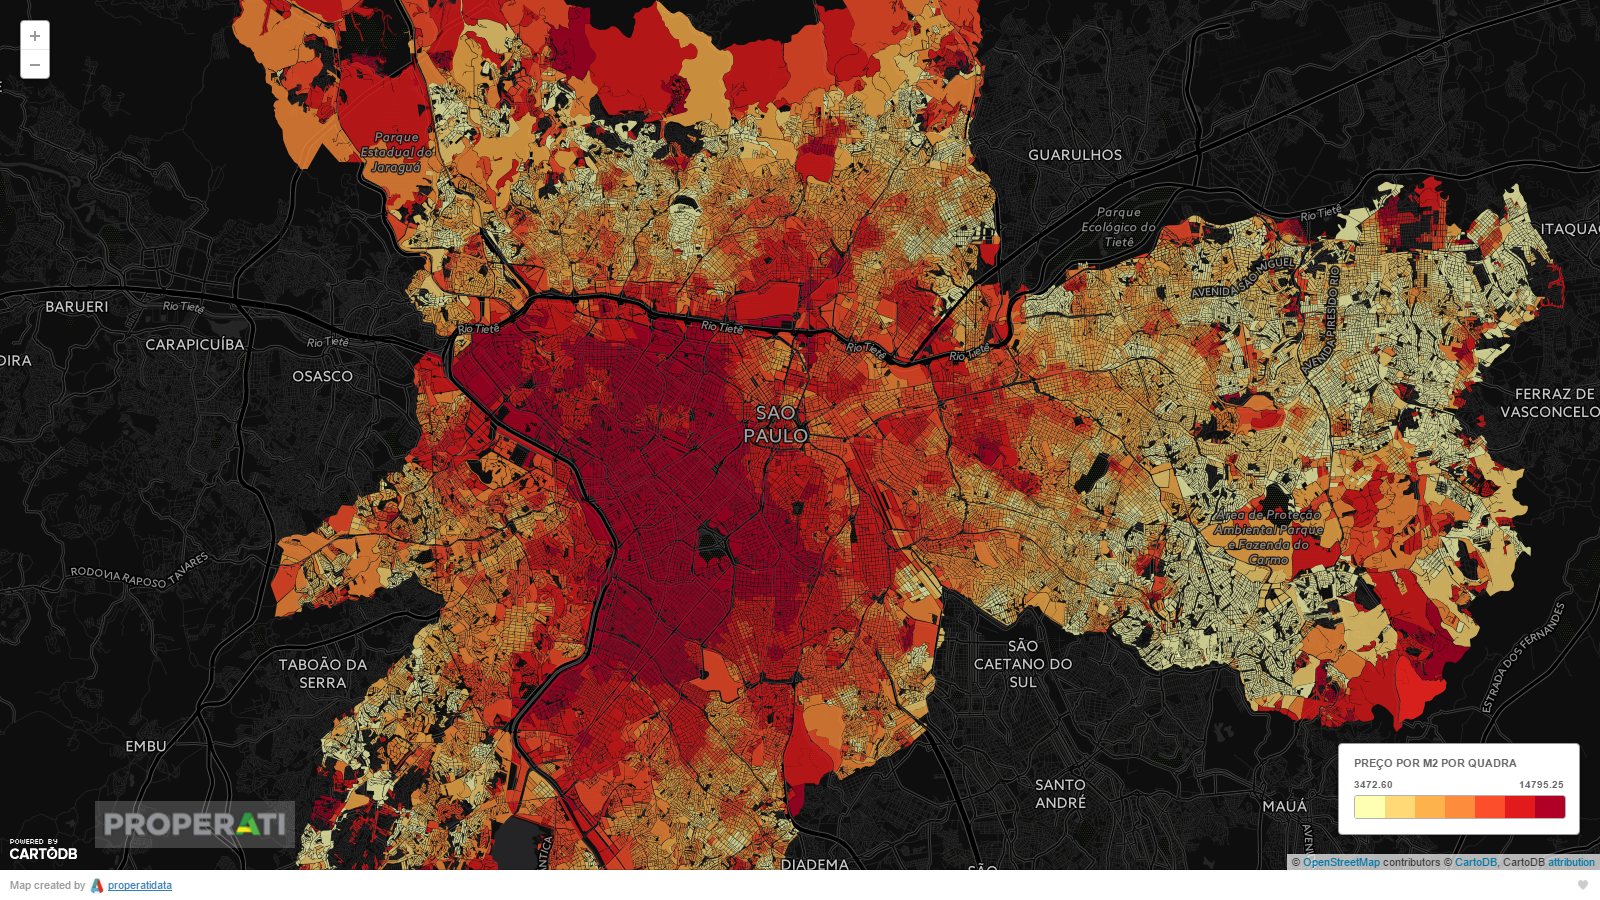 Urban Demographics Map Of Real Estate Prices In Sao Paulo